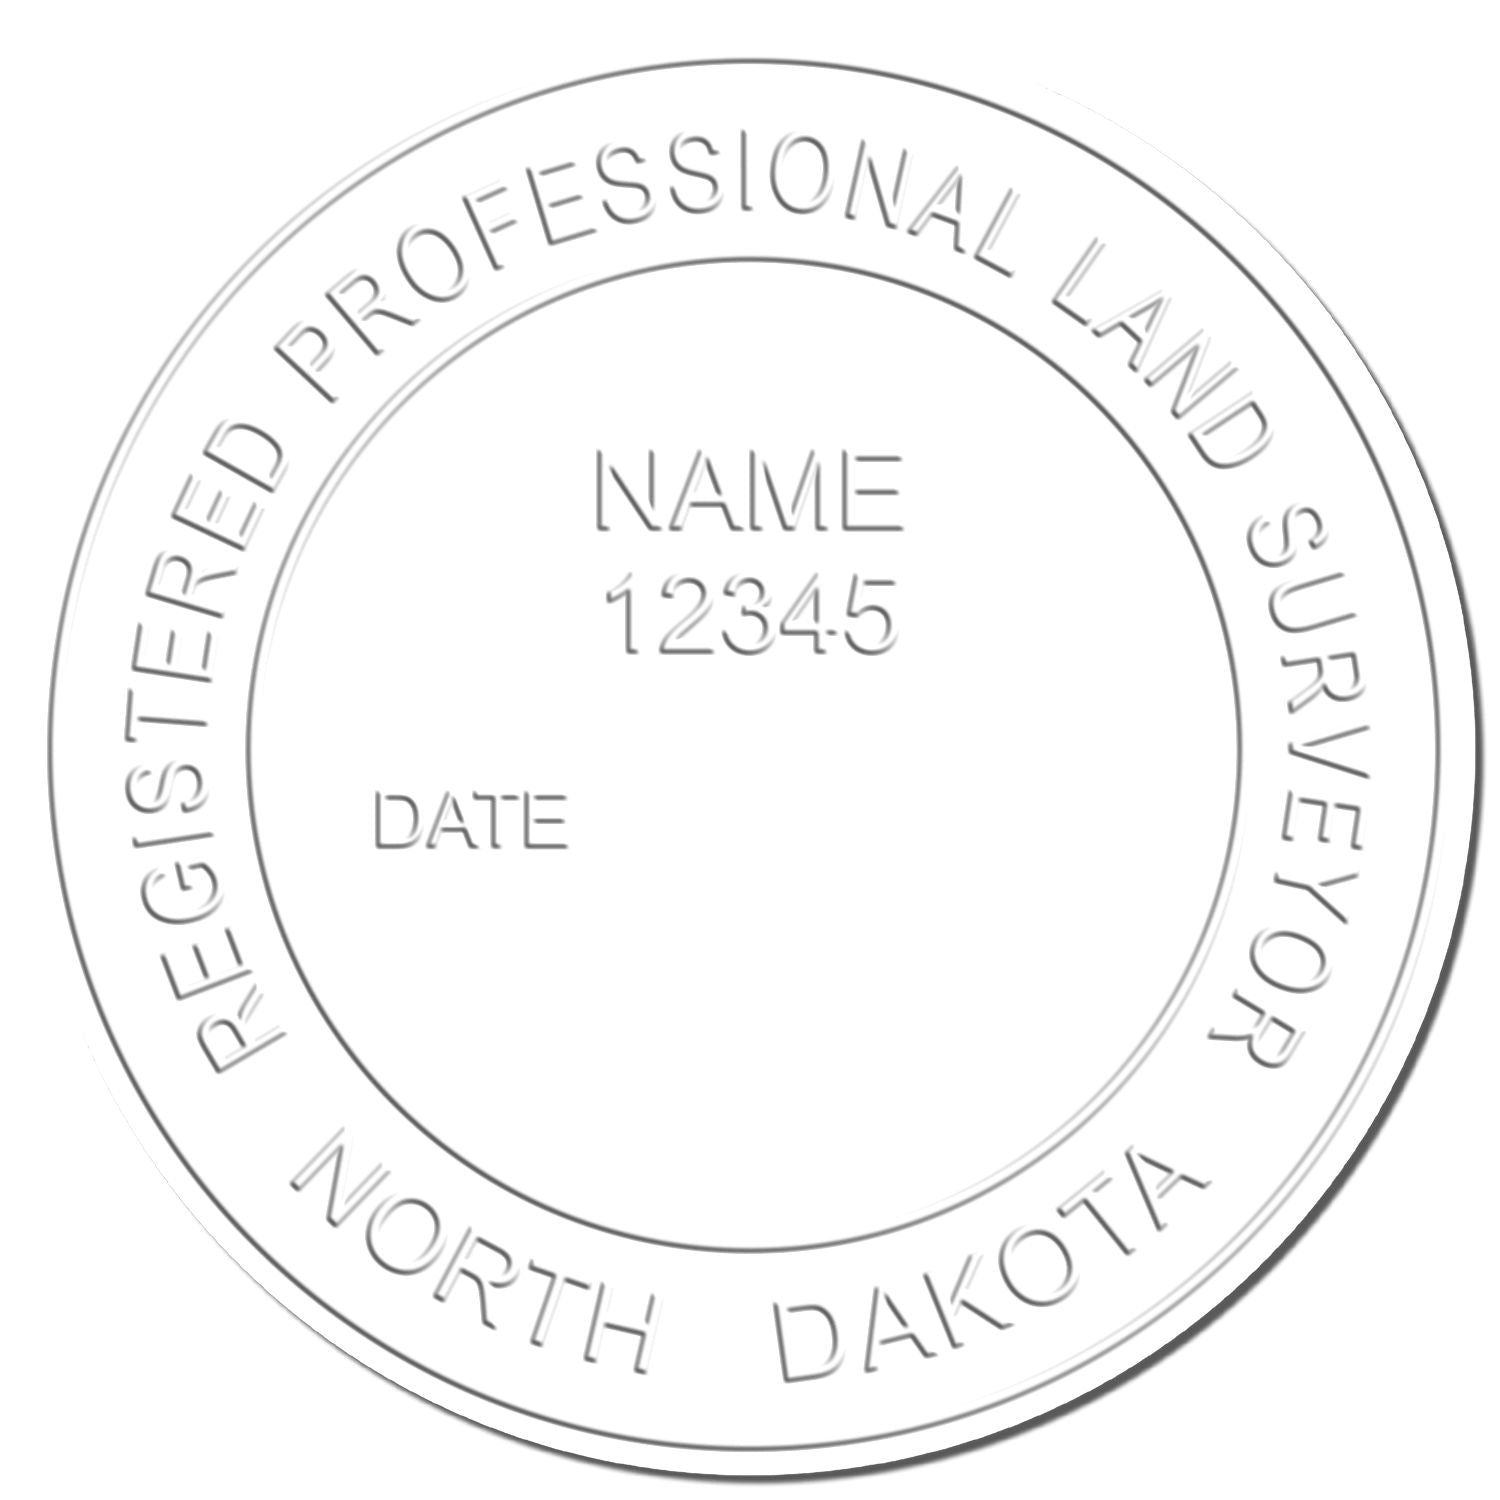 This paper is stamped with a sample imprint of the North Dakota Desk Surveyor Seal Embosser, signifying its quality and reliability.